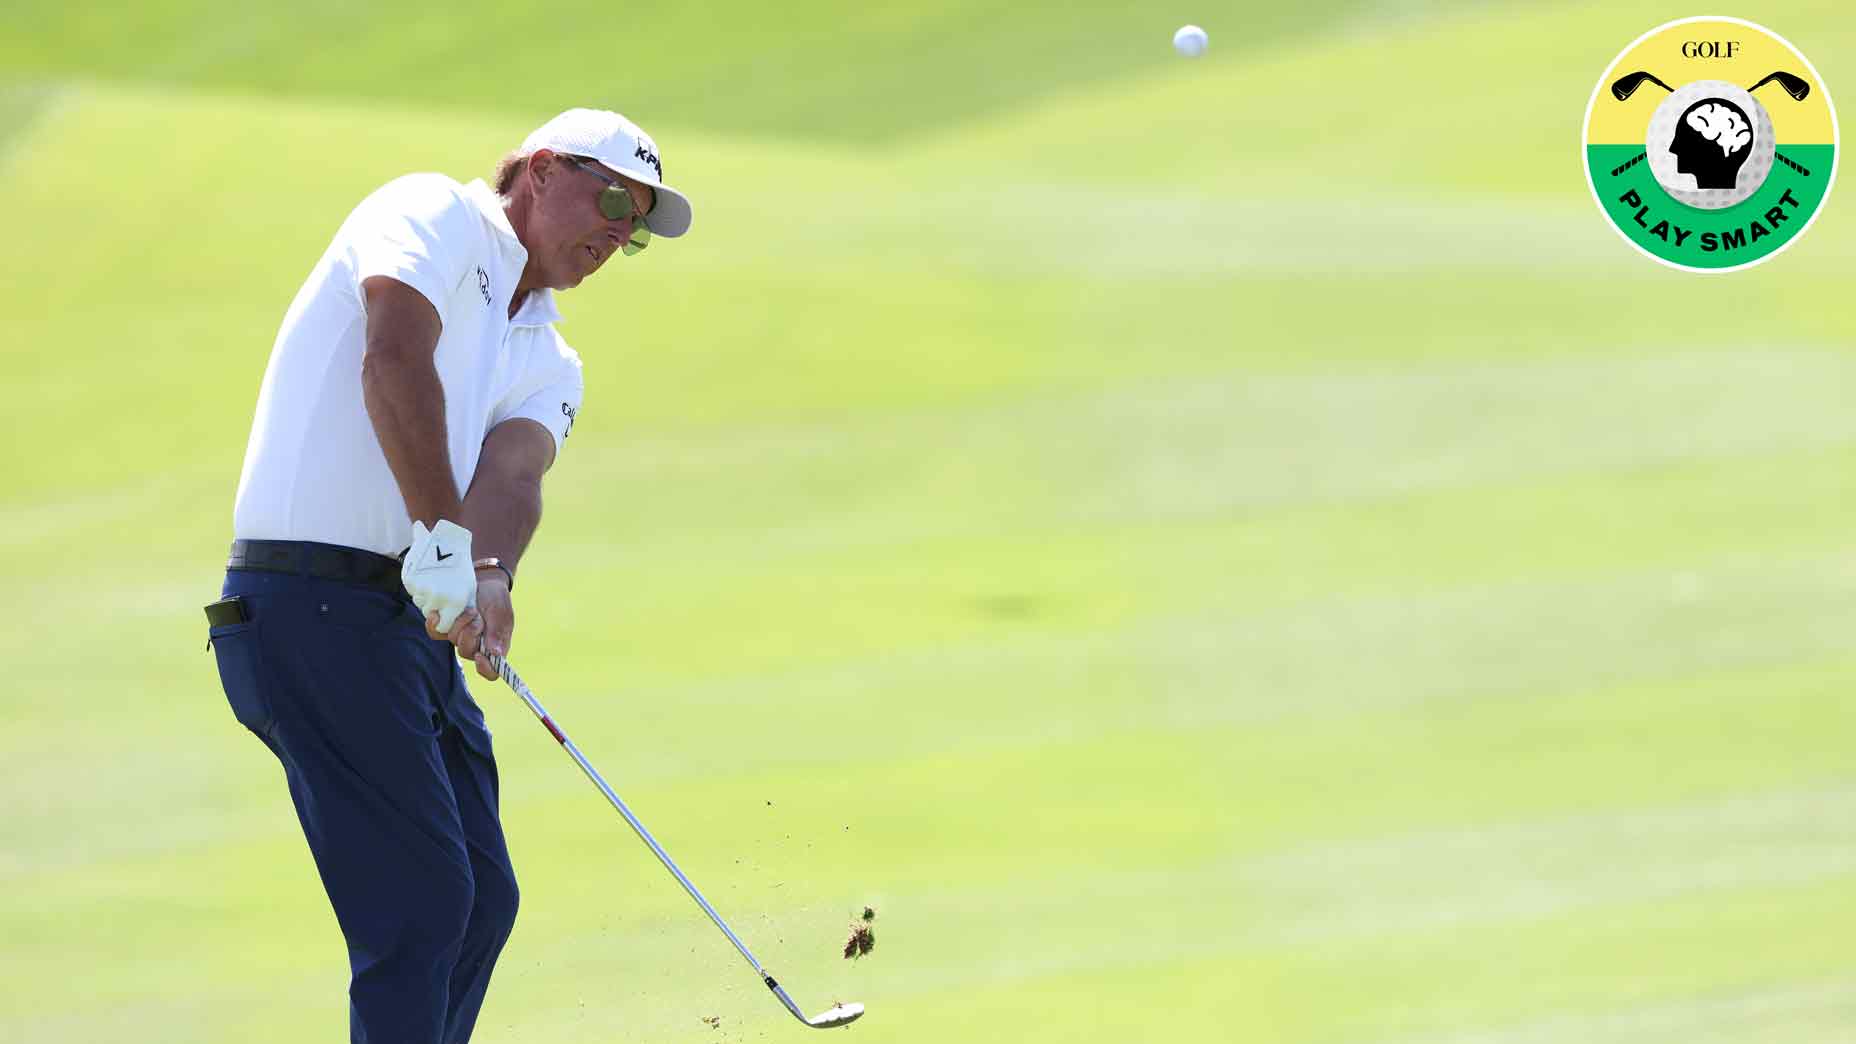 phil mickelson hits a chip shot during a practice round for the 2022 Saudi International